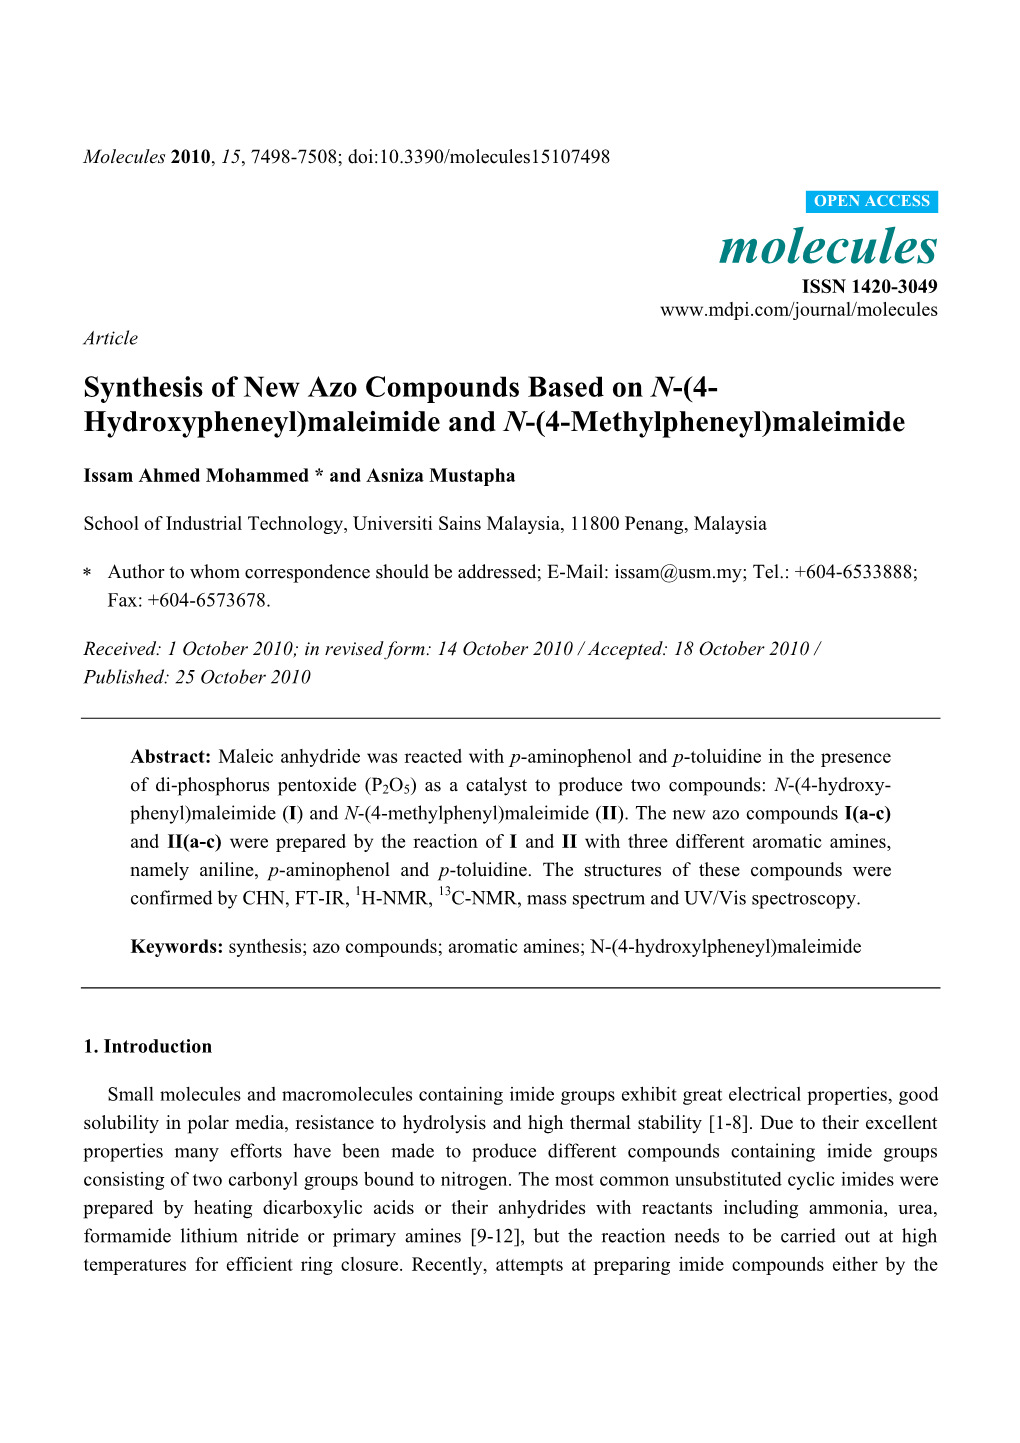 Synthesis of New Azo Compounds Based on N-(4- Hydroxypheneyl)Maleimide and N-(4-Methylpheneyl)Maleimide